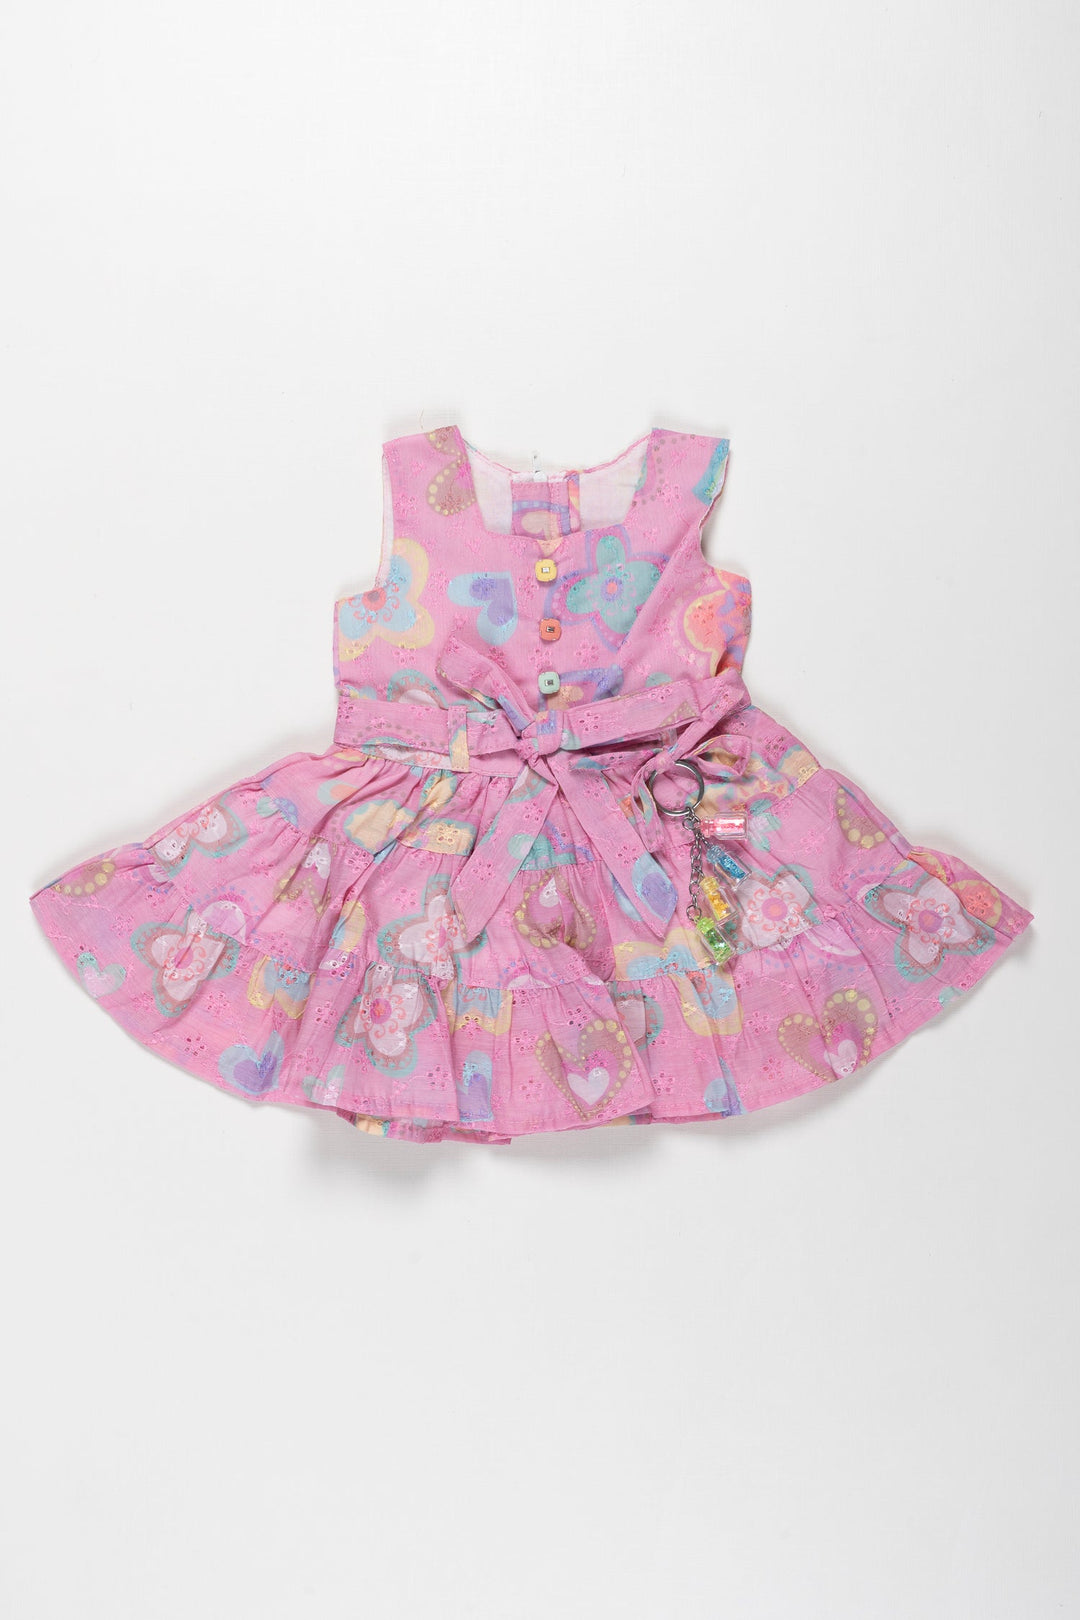 The Nesavu Girls Cotton Frock Vibrant Butterfly Print Cotton Frock for Girls - Colorful Summer Dress Nesavu Girls Butterfly Cotton Frock | Colorful & Comfortable Summer Dress | The Nesavu